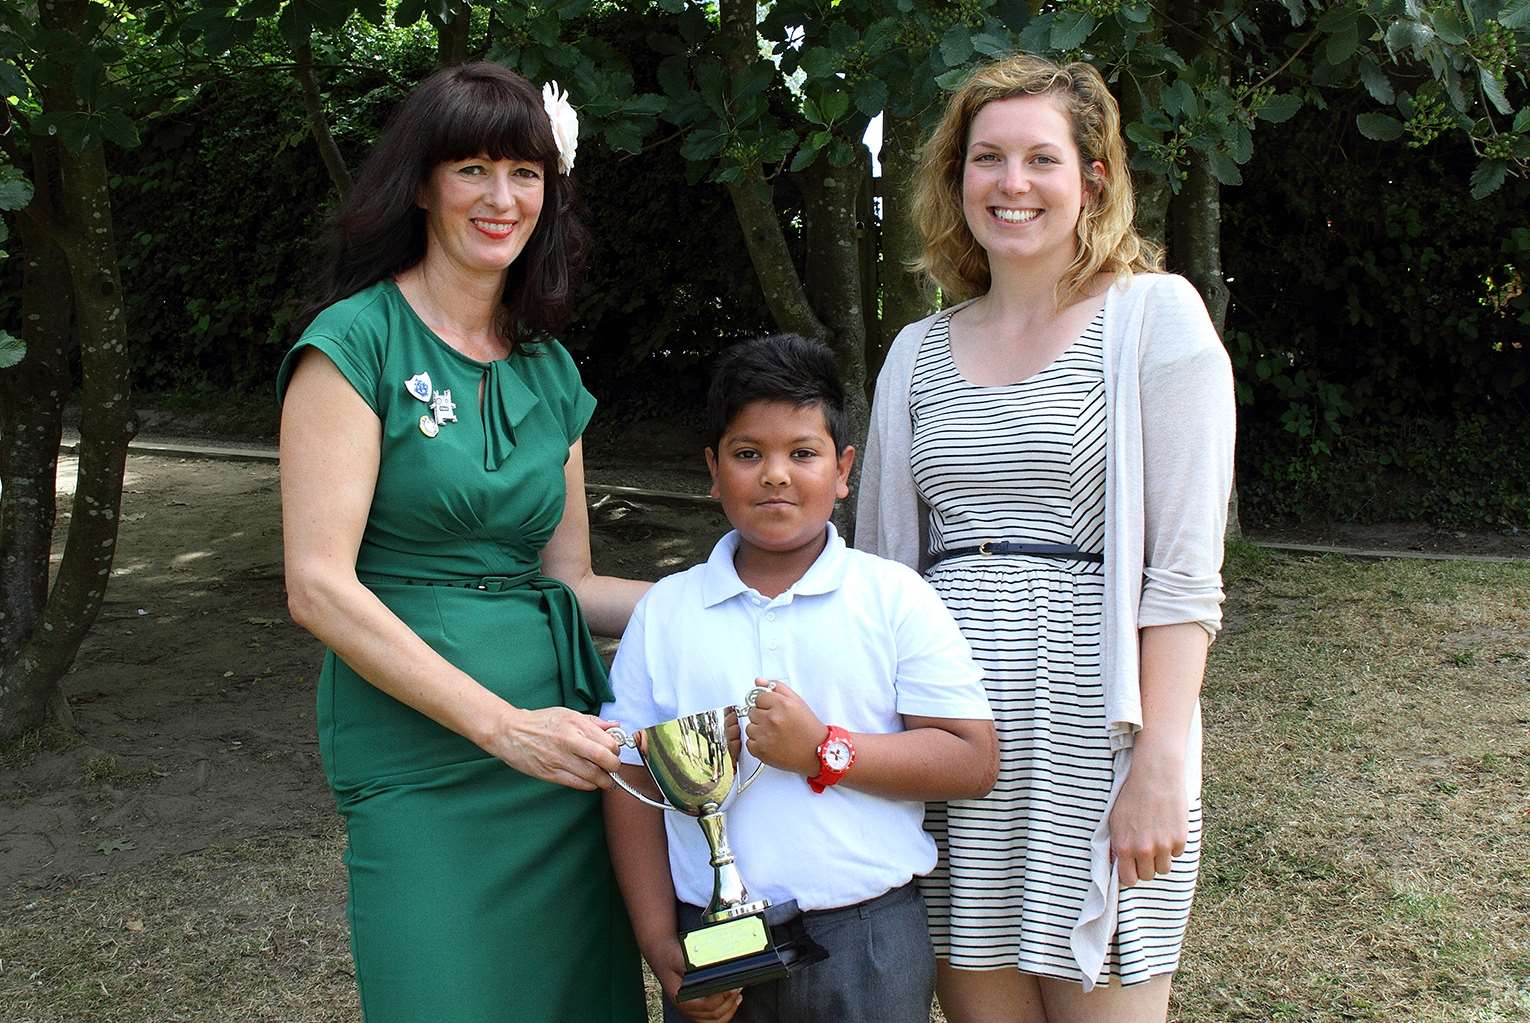 Liz Pichon, Hansraj and Sarah Stenning from Explore Learning and the National Young Writer's Award